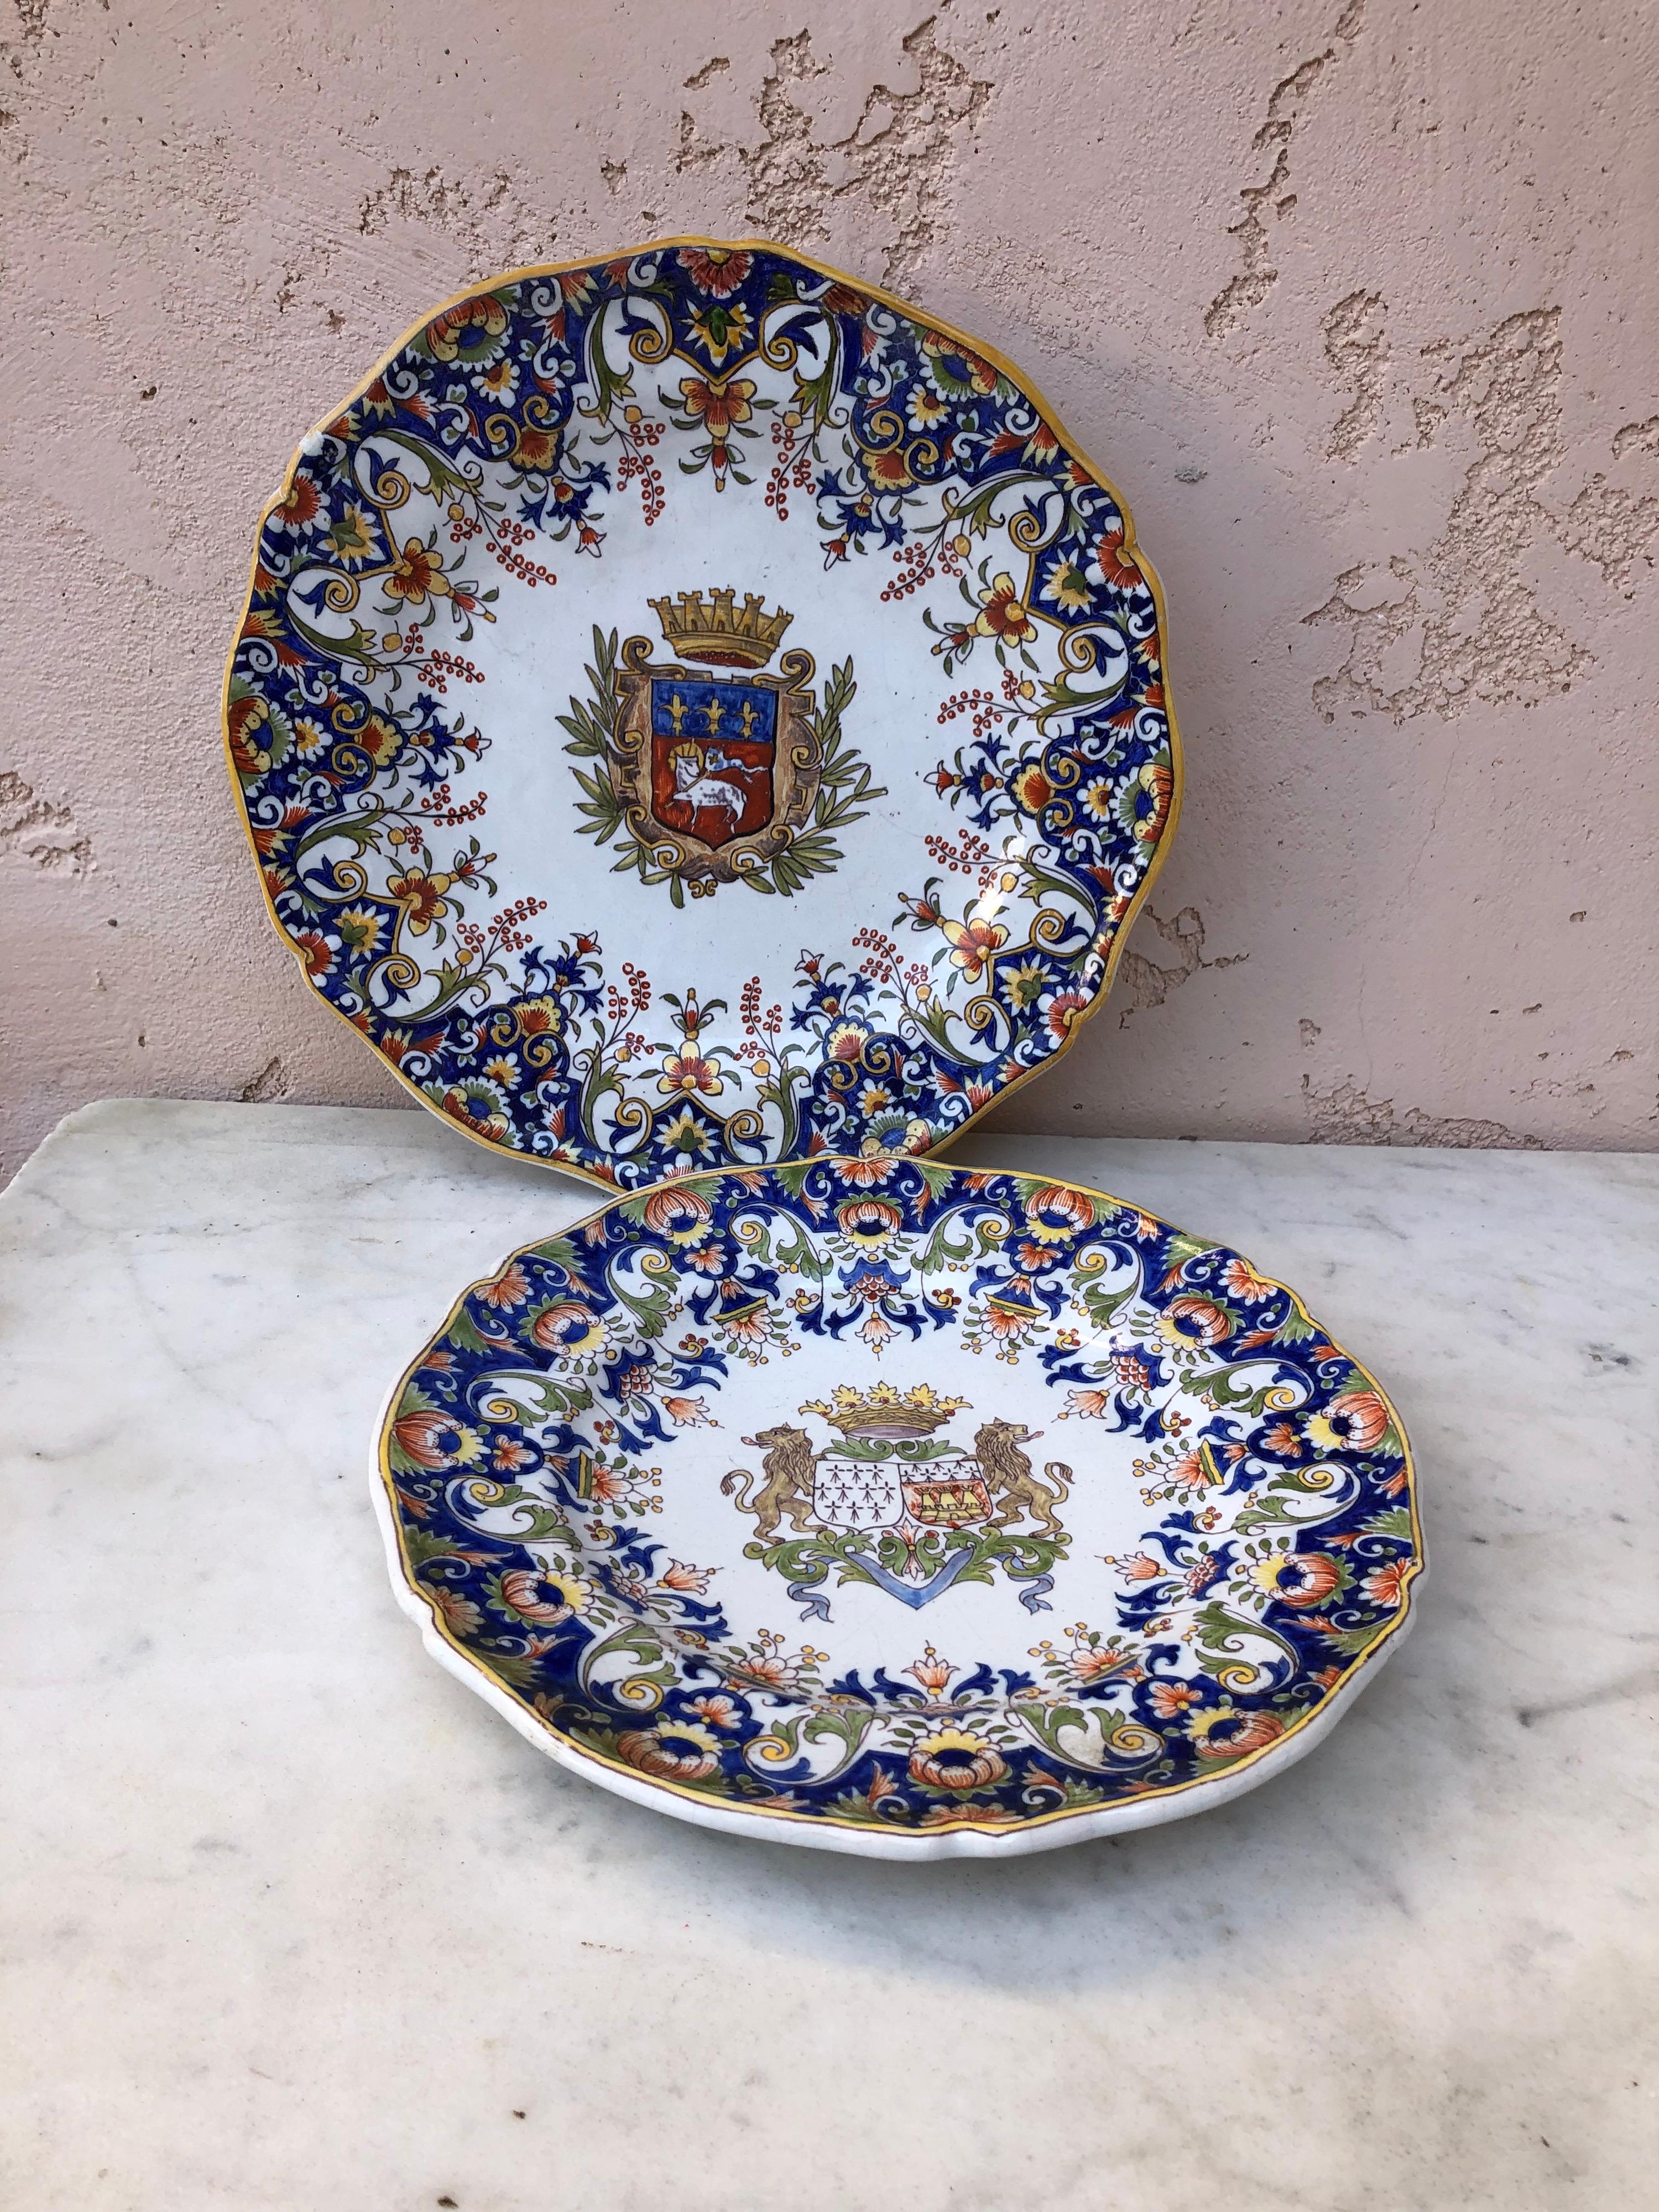 19th Century Large French Faience Platter with Armoiries Desvres 2